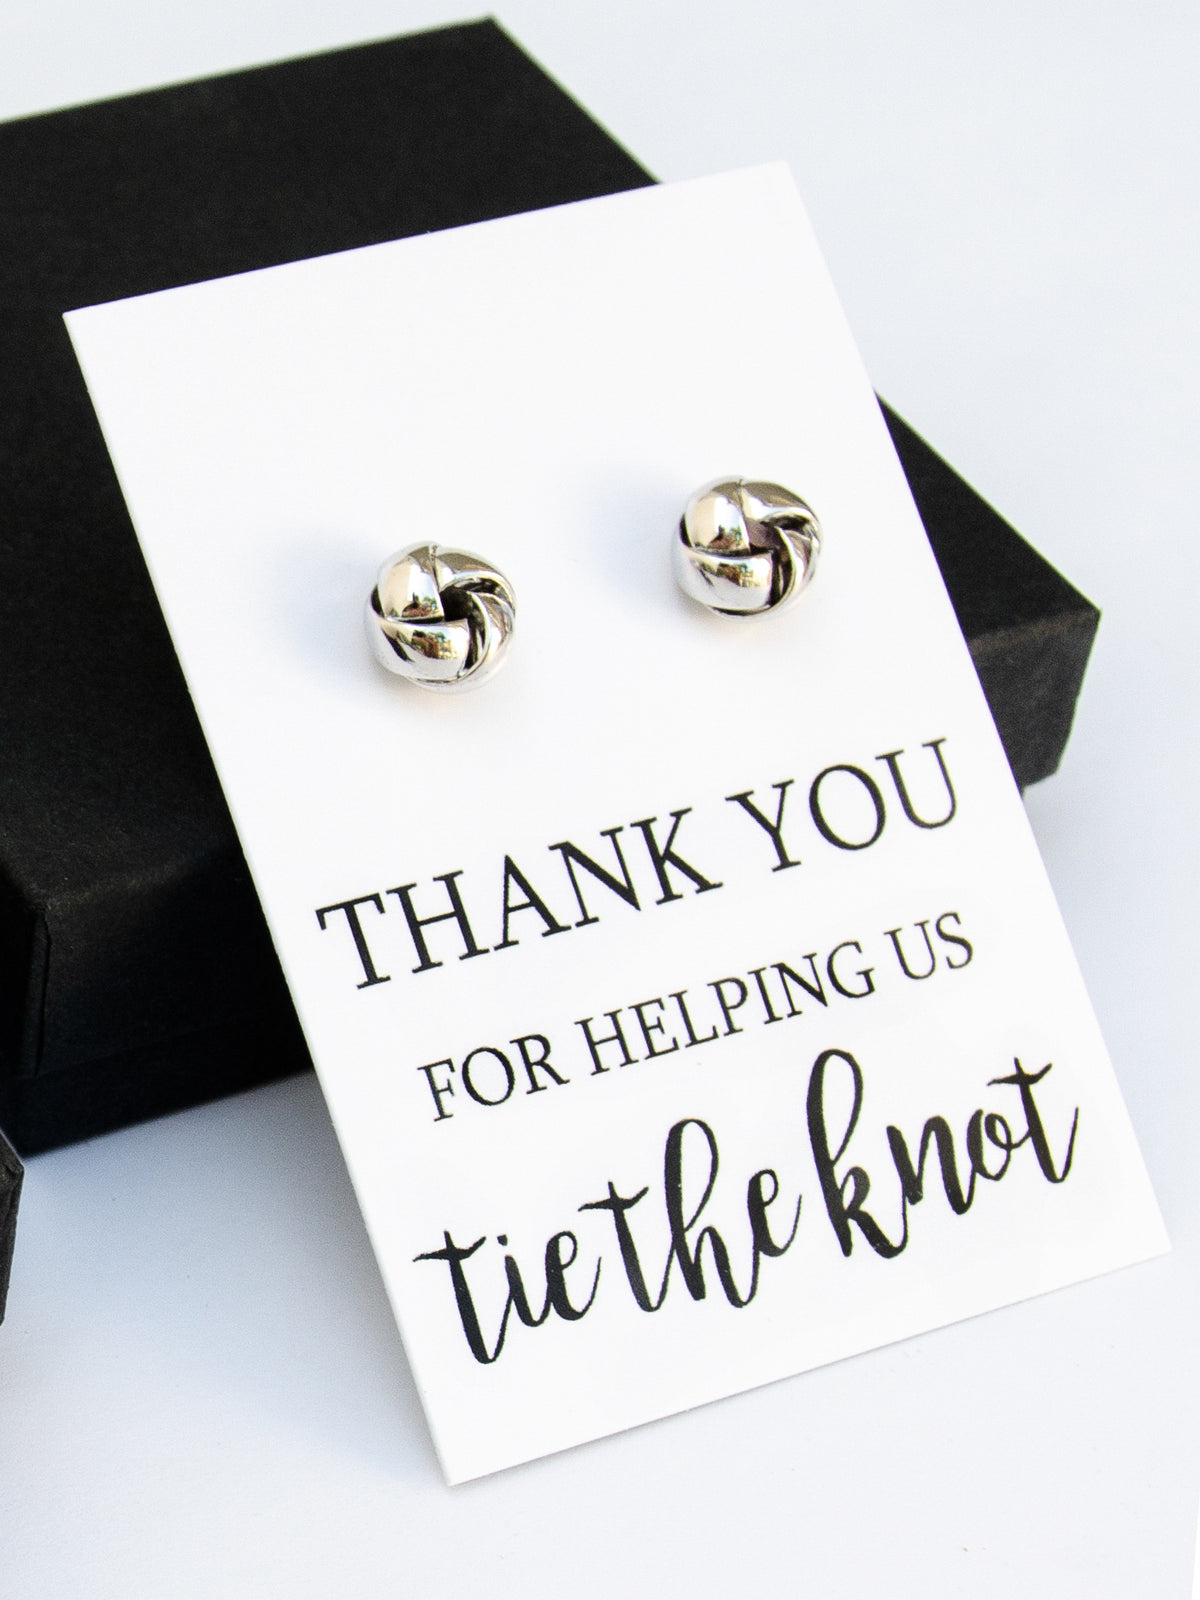 Tie The Knot Stud Earrings Style C Bridesmaid Thank You Gift,Bridal Party Thank You,Thank You For Helping Us Tie The Knot Bridesmaid Gift